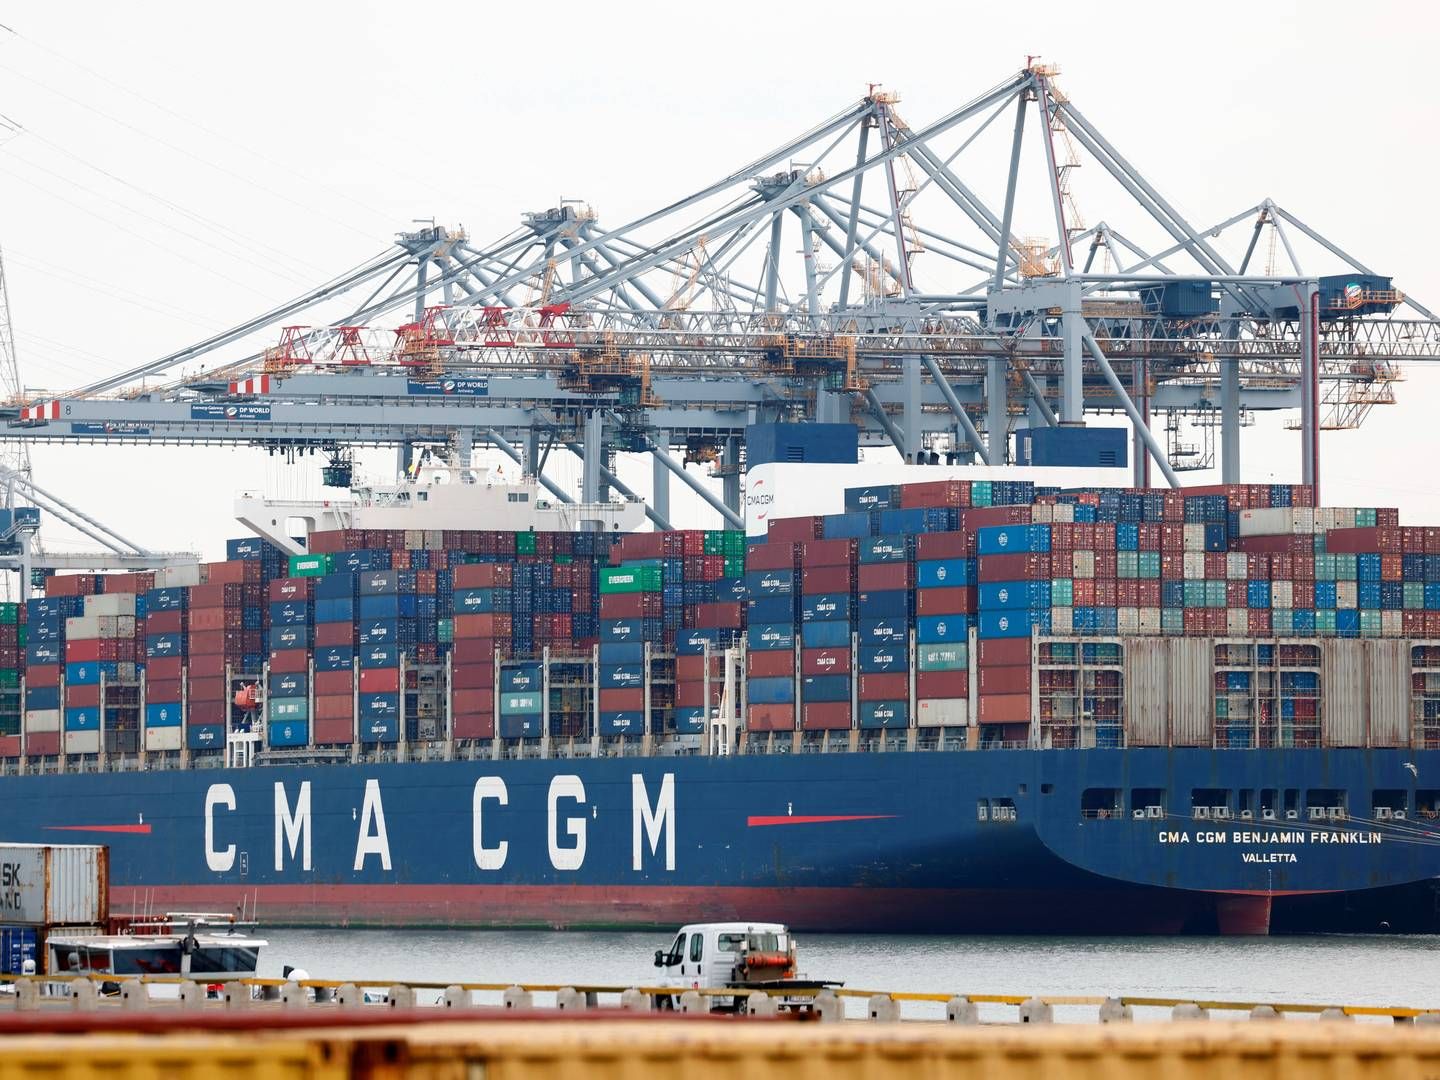 A CMA CGM ship in Antwerp, the terminus of the new French Peak service.